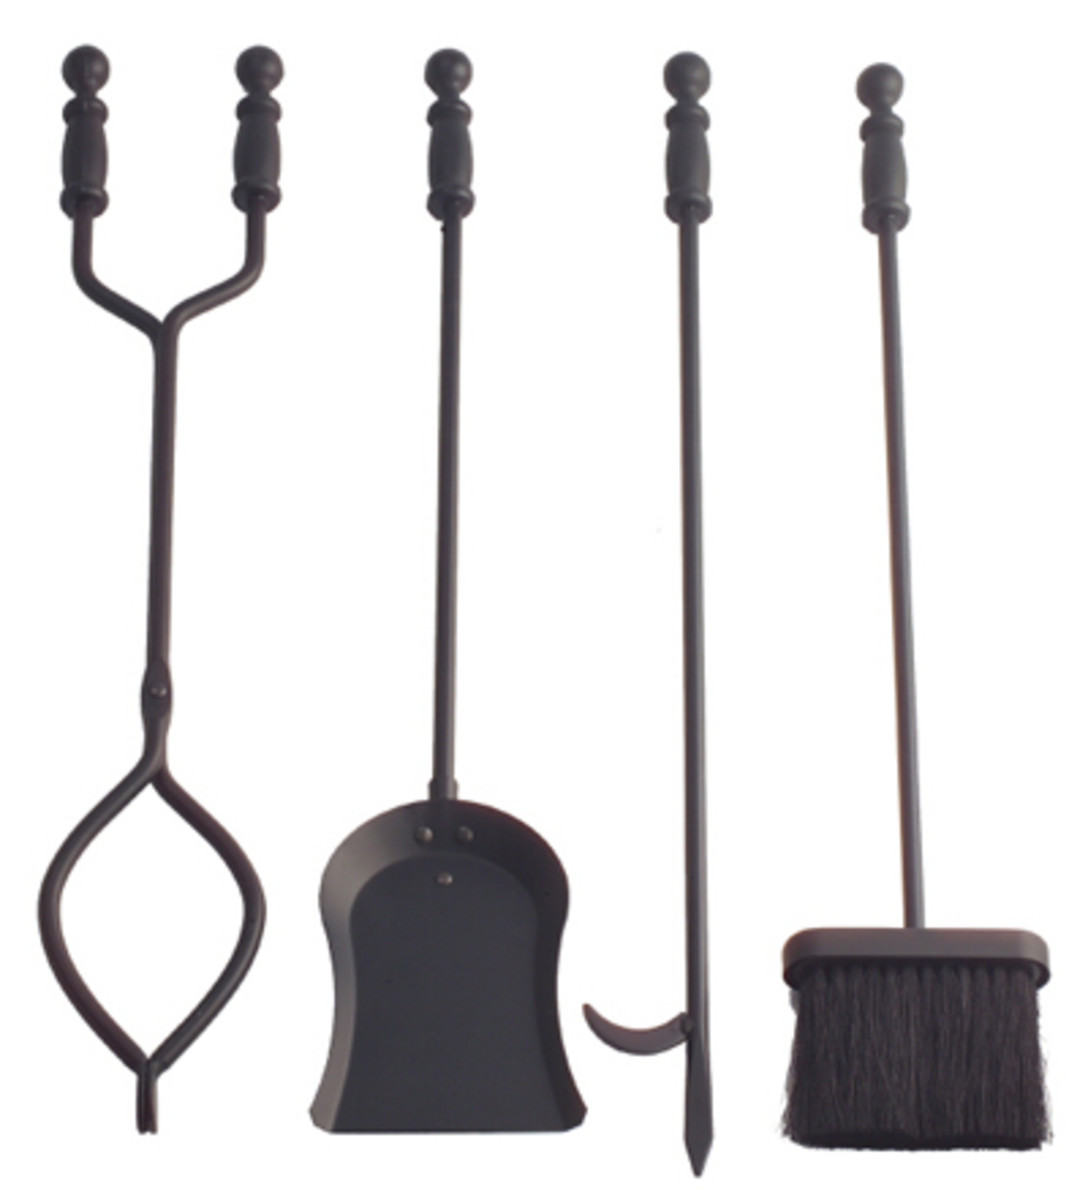 An Overview of Fireplace Tools